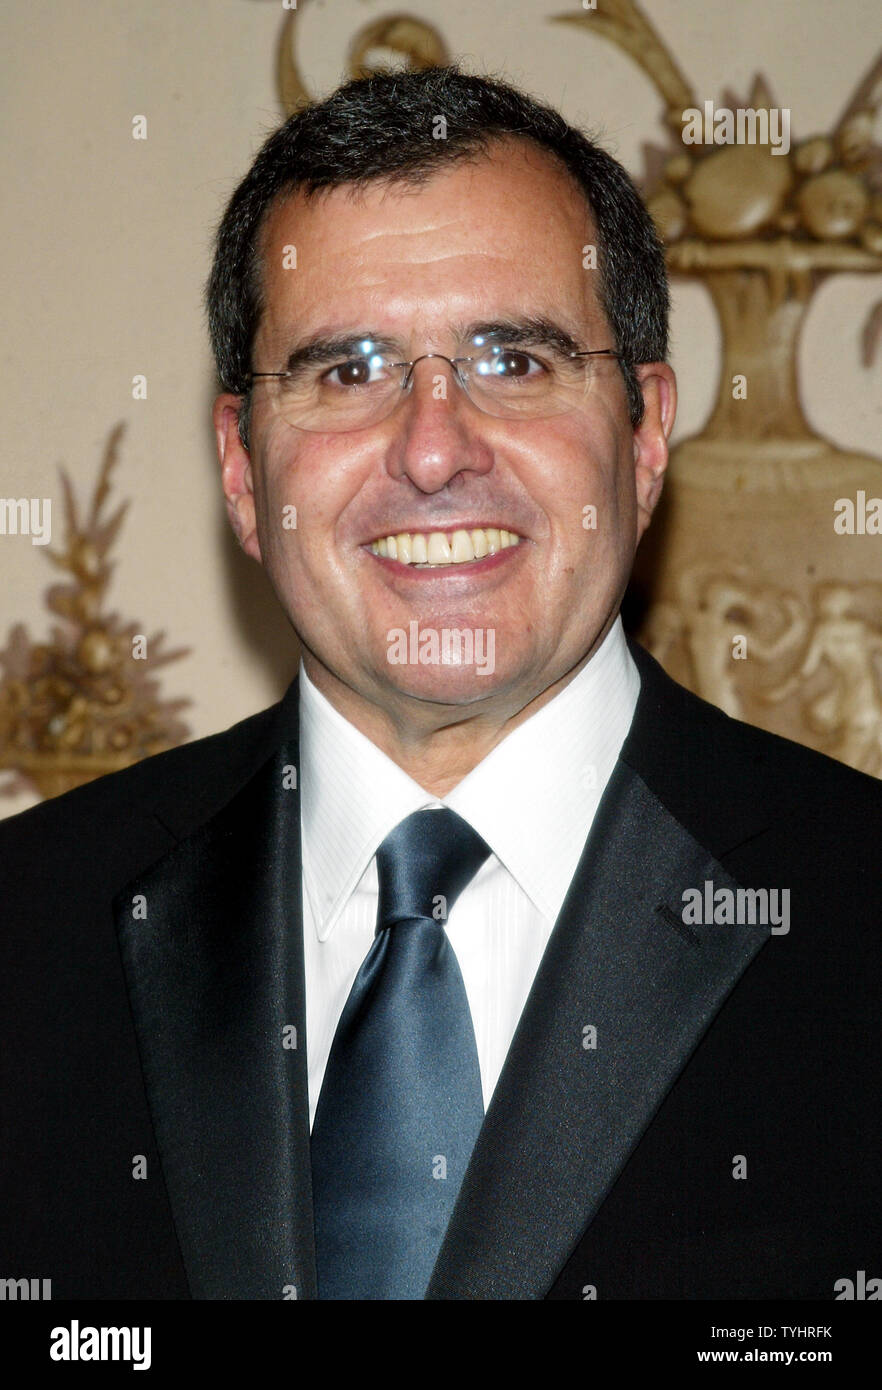 Peter Chernin, President and COO of News Corporation and Chairman and CEO of The Fox Group, arrives for the 16th Annual Broadcasting & Cable Hall of Fame Awards Dinner at the Waldorf Astoria in New York on October 23, 2006.  (UPI Photo/Laura Cavanaugh) Stock Photo